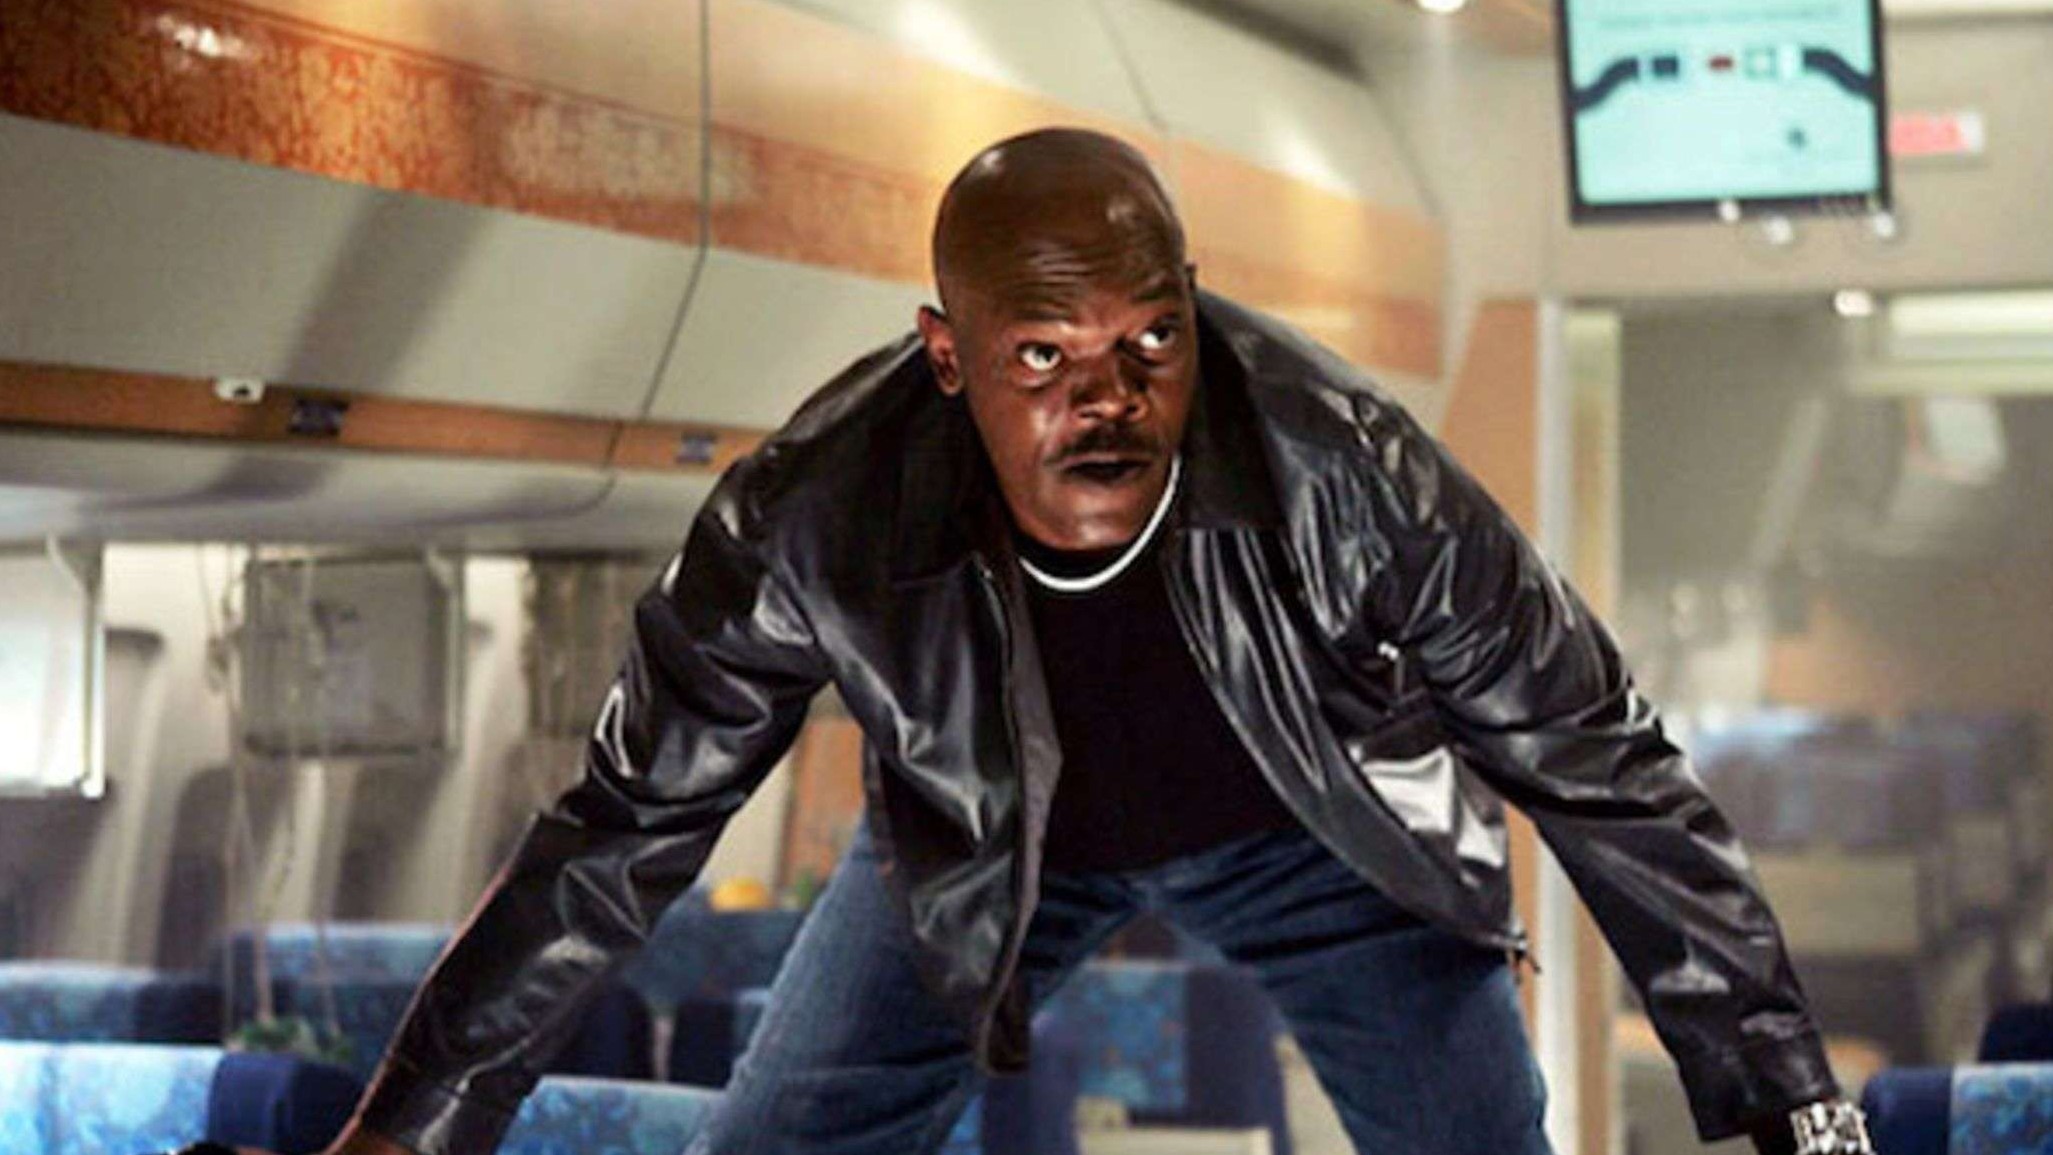 <p><span>The title of the movie says it all. Other than that, the only thing you need to know about this plane movie is that</span><a href="https://www.giantfreakinrobot.com/ent/samuel-l-jackson-food.html"> <span>Samuel L. Jackson</span></a><span> leads it. And it has one of his Samuel L. Jackson moments that make this movie completely amazing. The story, for what it’s worth, has Jackson playing agent Neville Flynn, who is trying to keep a witness alive while the plane is being overridden by deadly snakes.</span><a href="https://www.imdb.com/title/tt0417148/?ref_=nv_sr_srsg_0_tt_8_nm_0_q_Snakes%2520on%2520a%2520"> <i><span>Snakes on a Plane</span></i></a><span> is classic Samuel L. Jackson.</span></p>